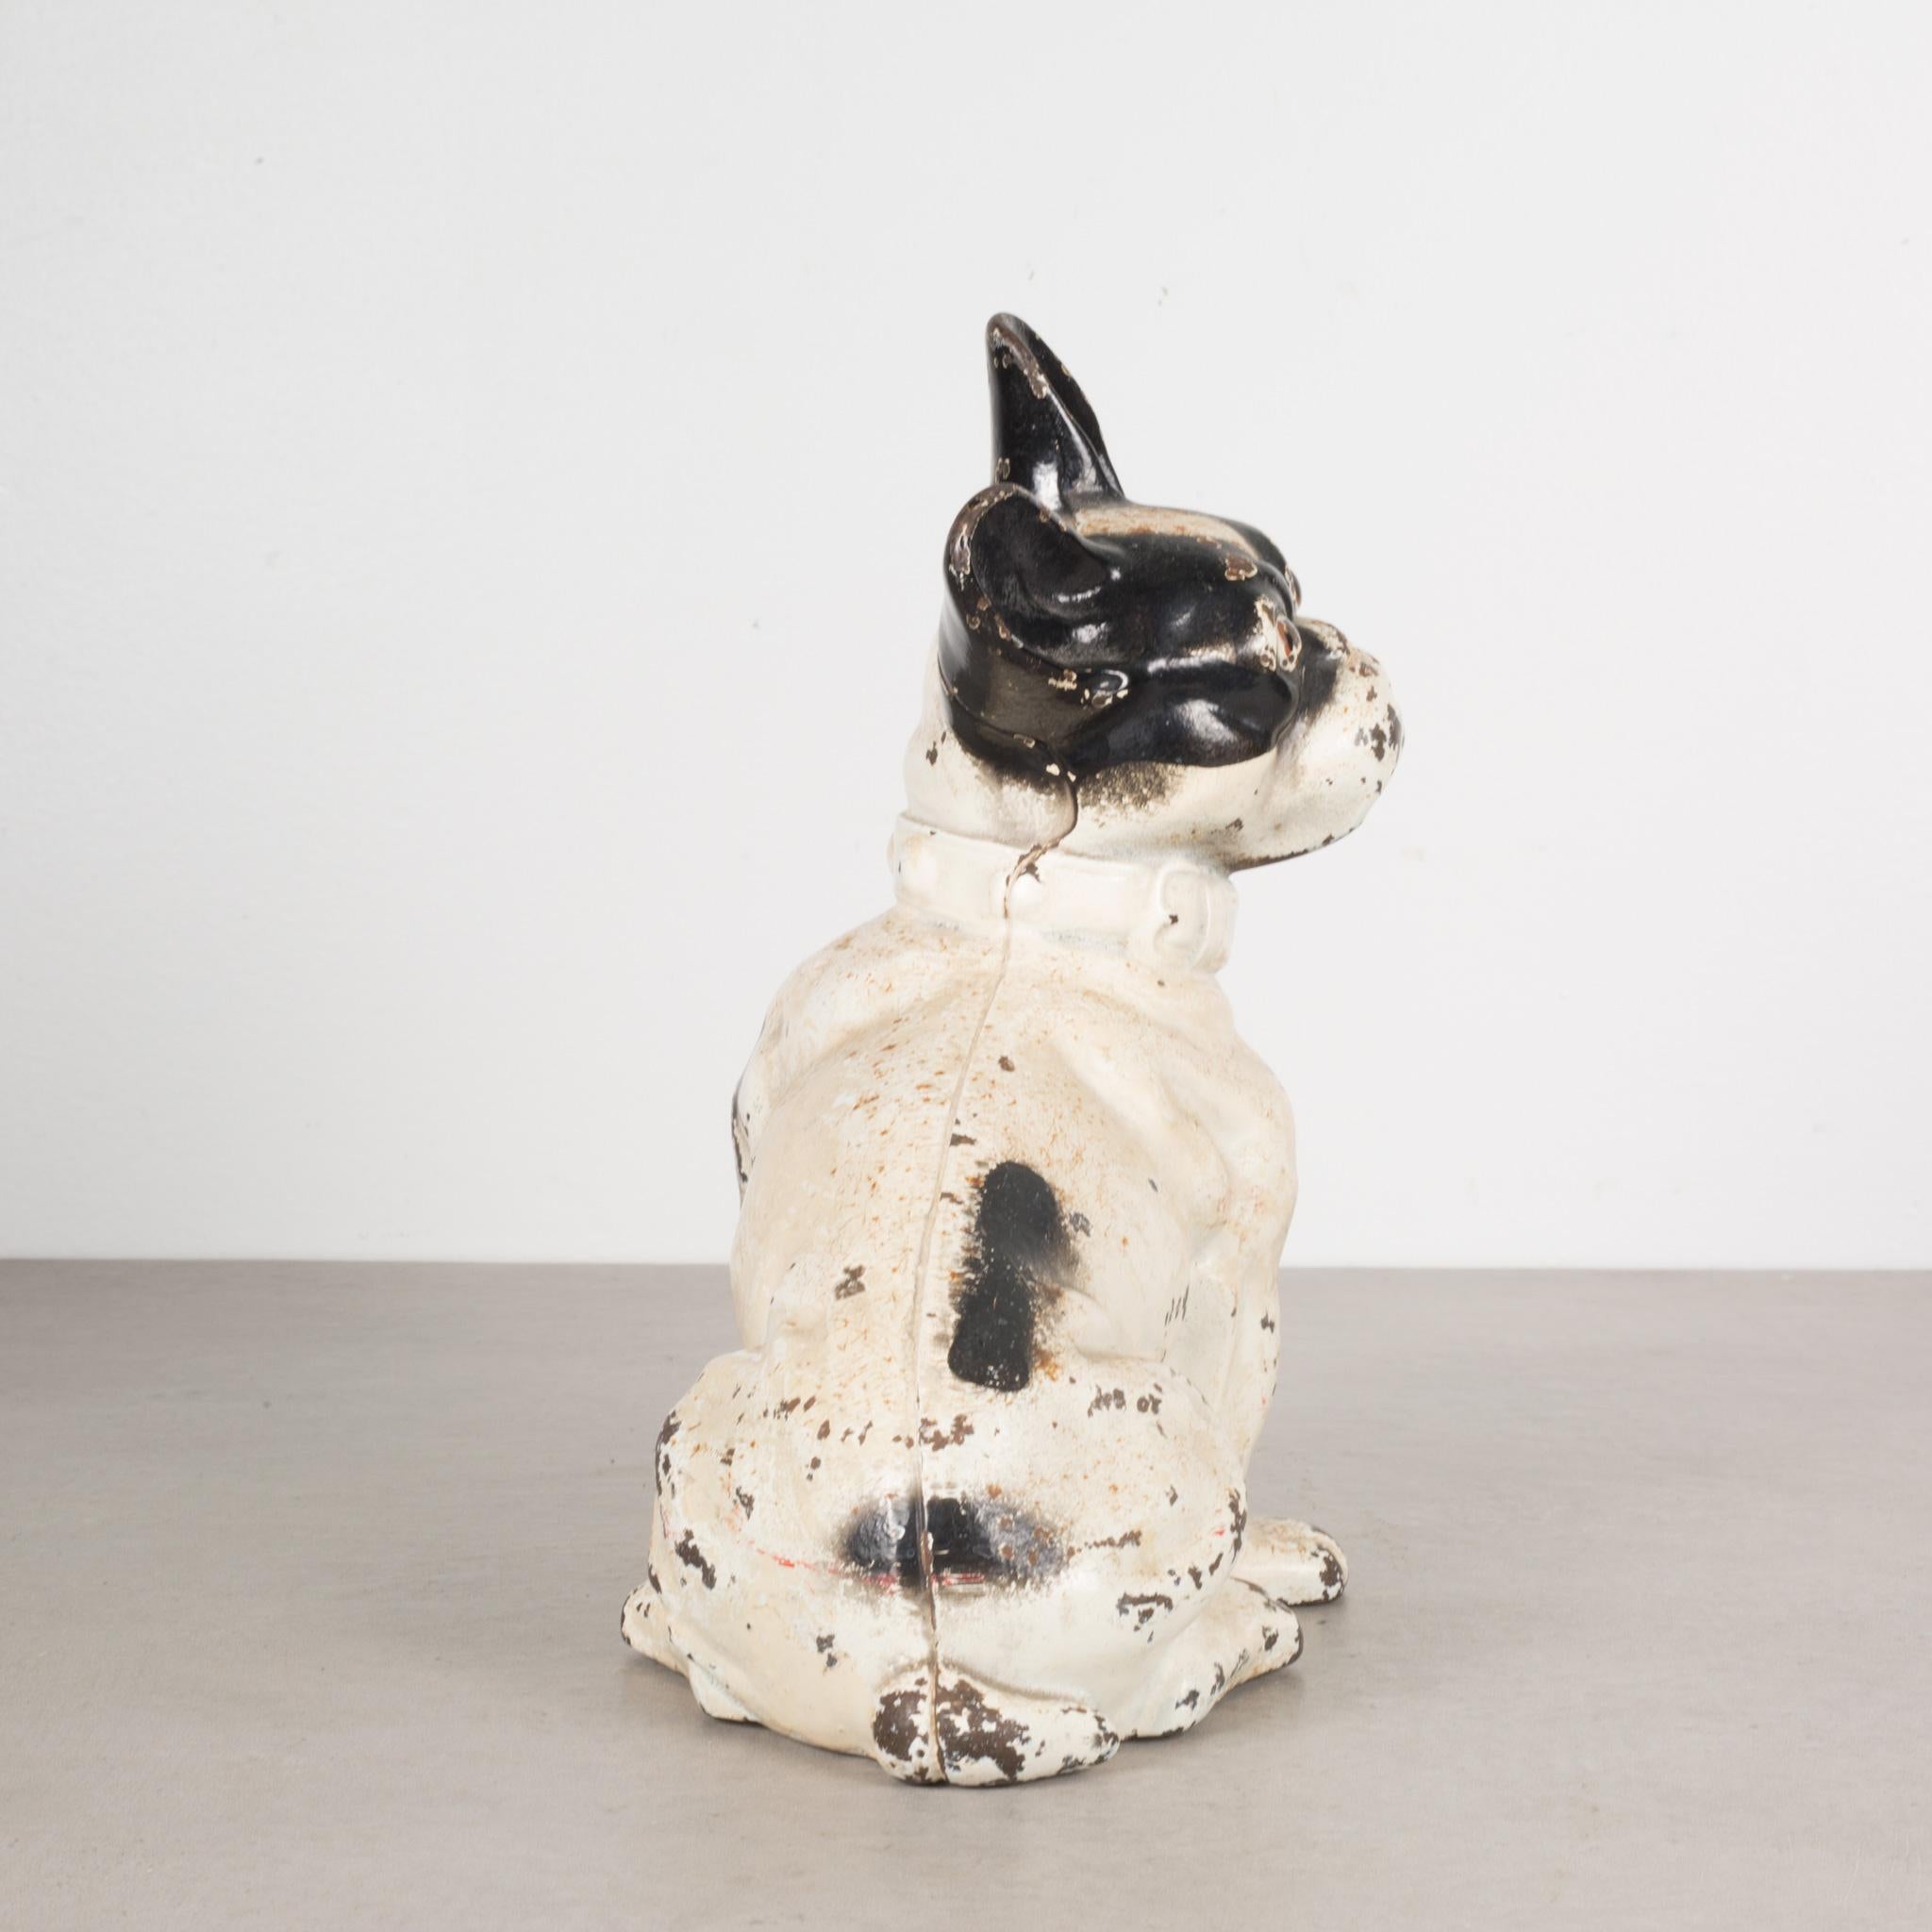 Industrial Early 20th Century Cast Iron French Bulldog Doorstop by Hubley, c. 1910- 1940s